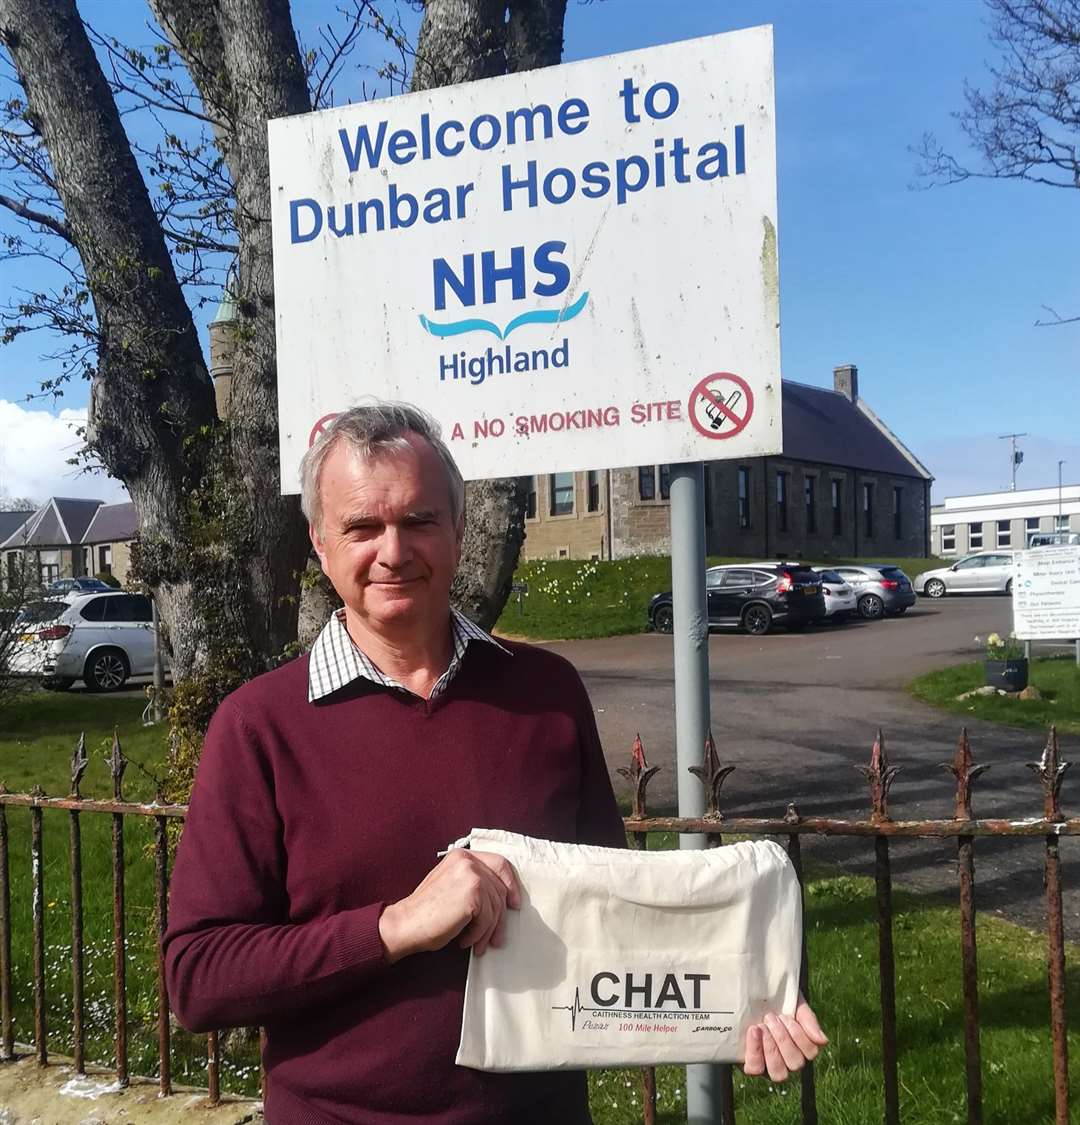 Ron Gunn of Caithness Health Action Team about to deliver tablets to the Dunbar Hospital in Thurso.